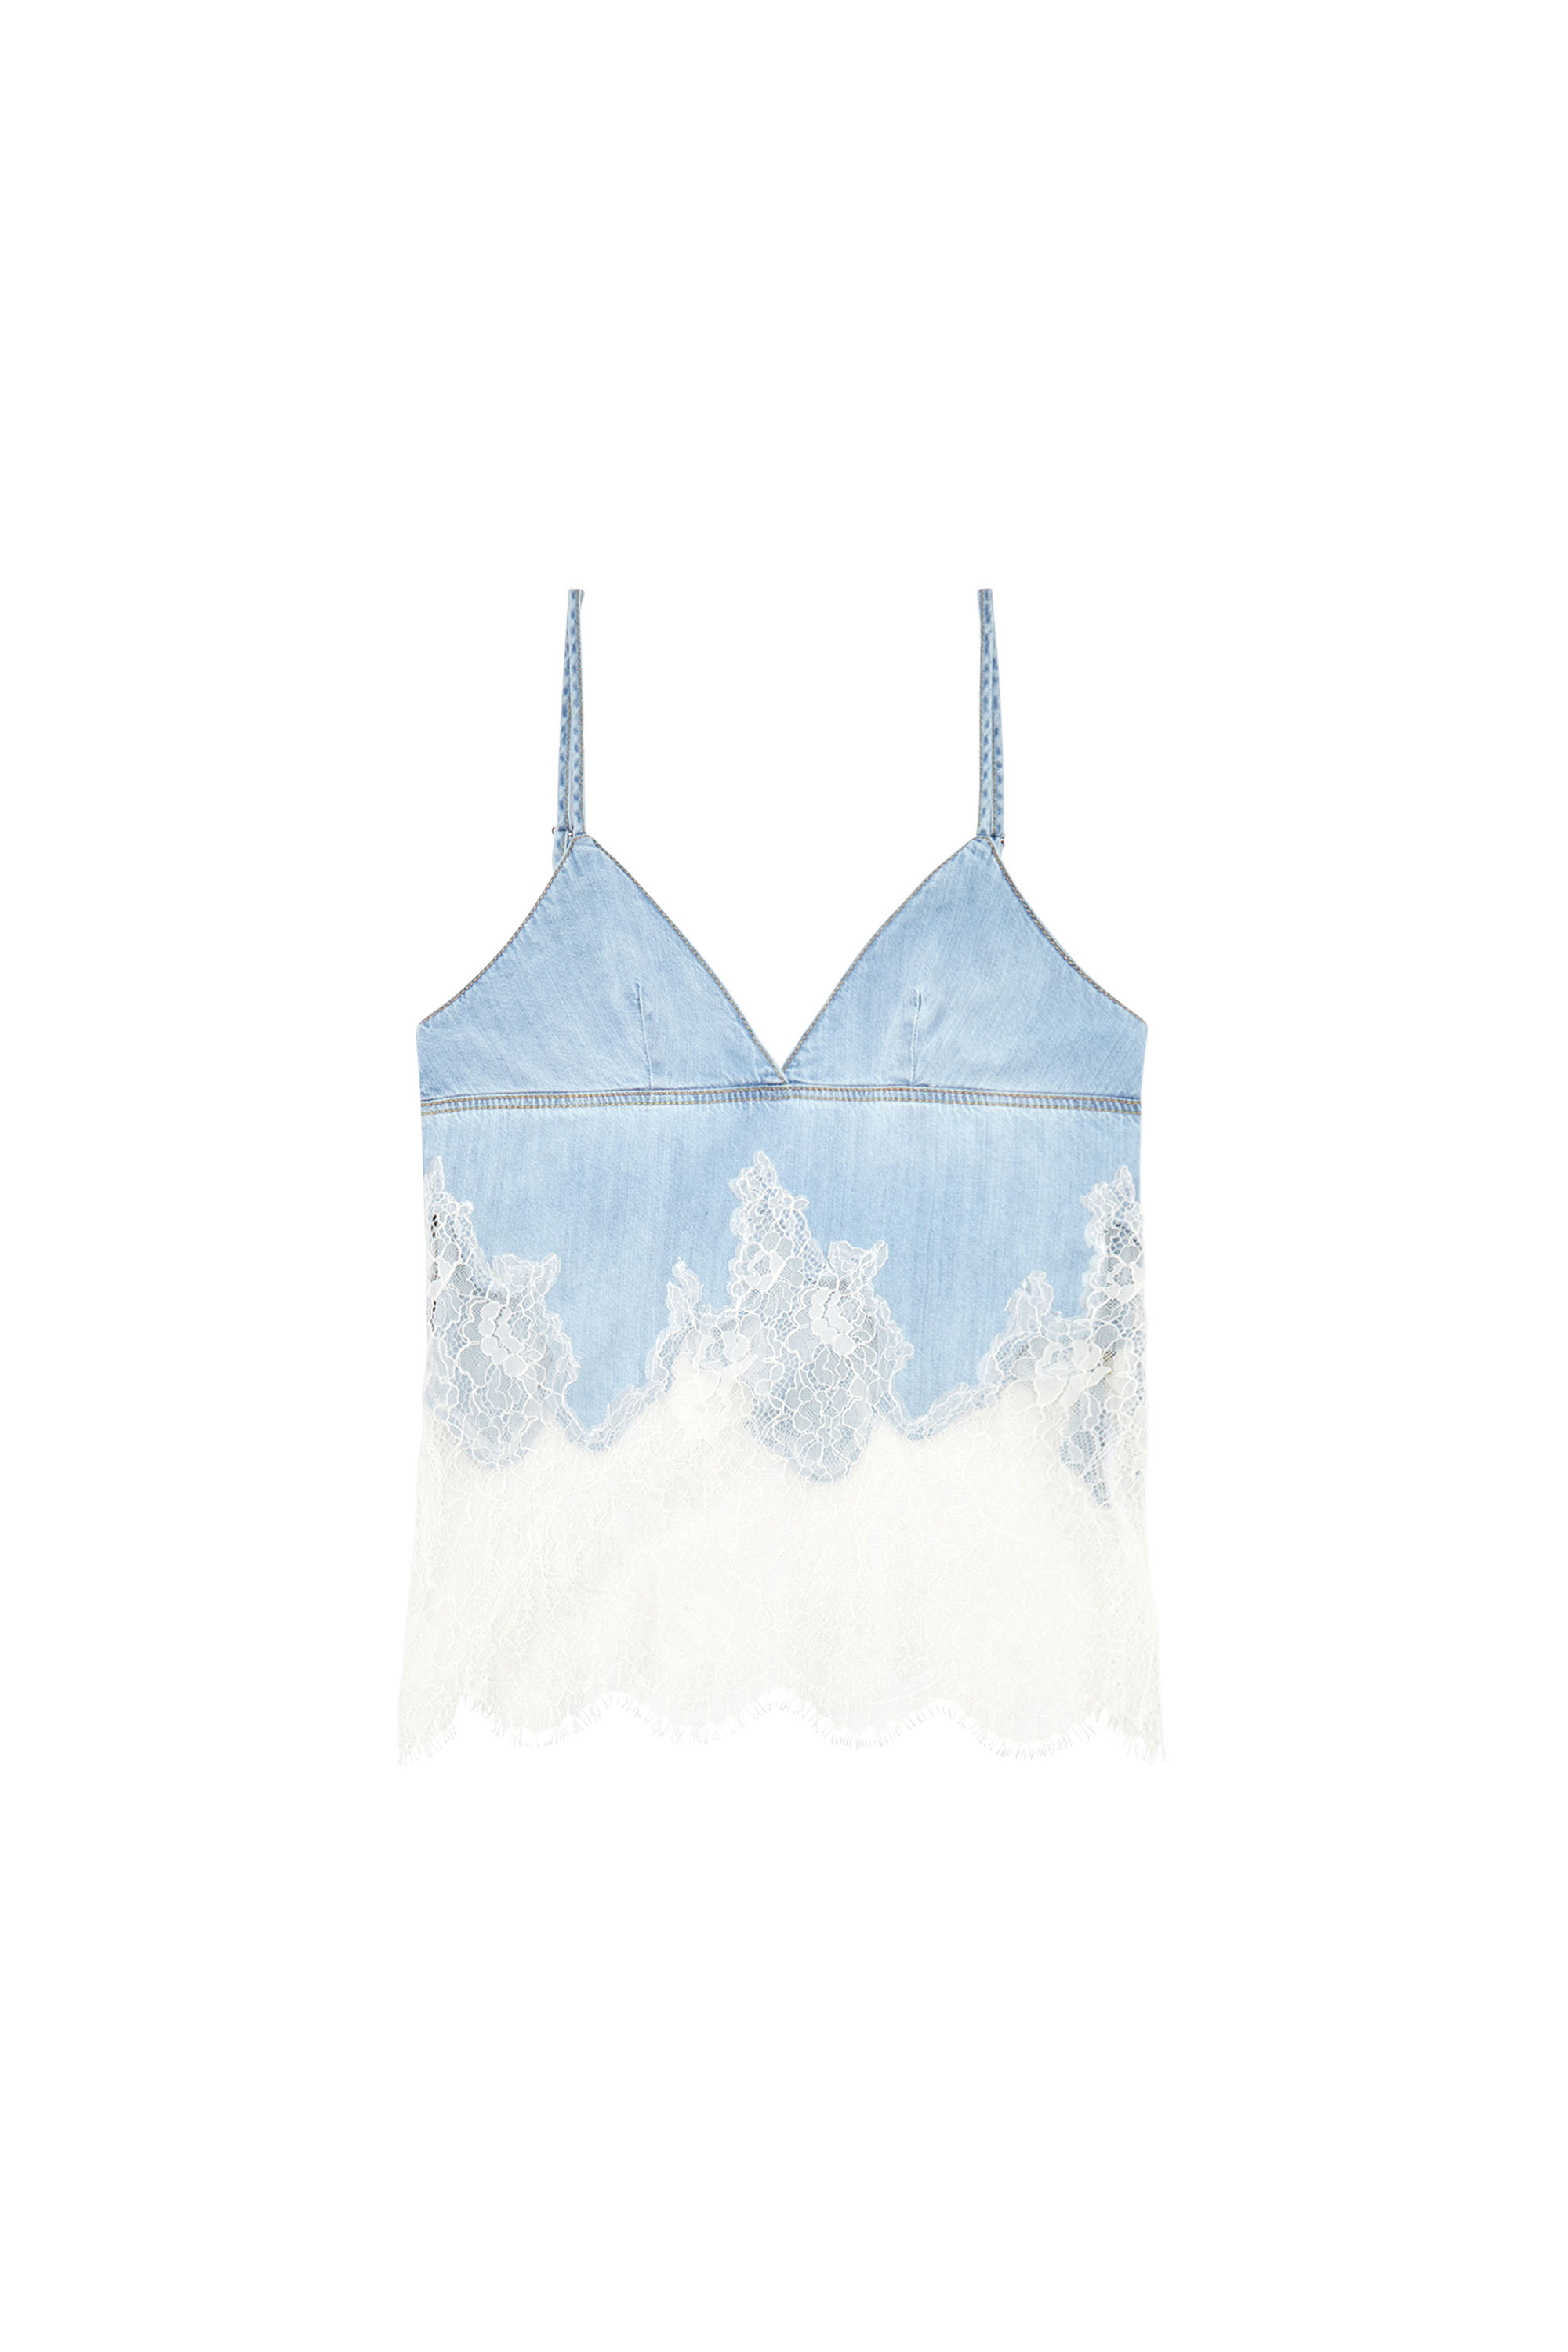 Diesel - DE-MONY-S, Woman Strappy top in denim and lace in Blue - Image 3